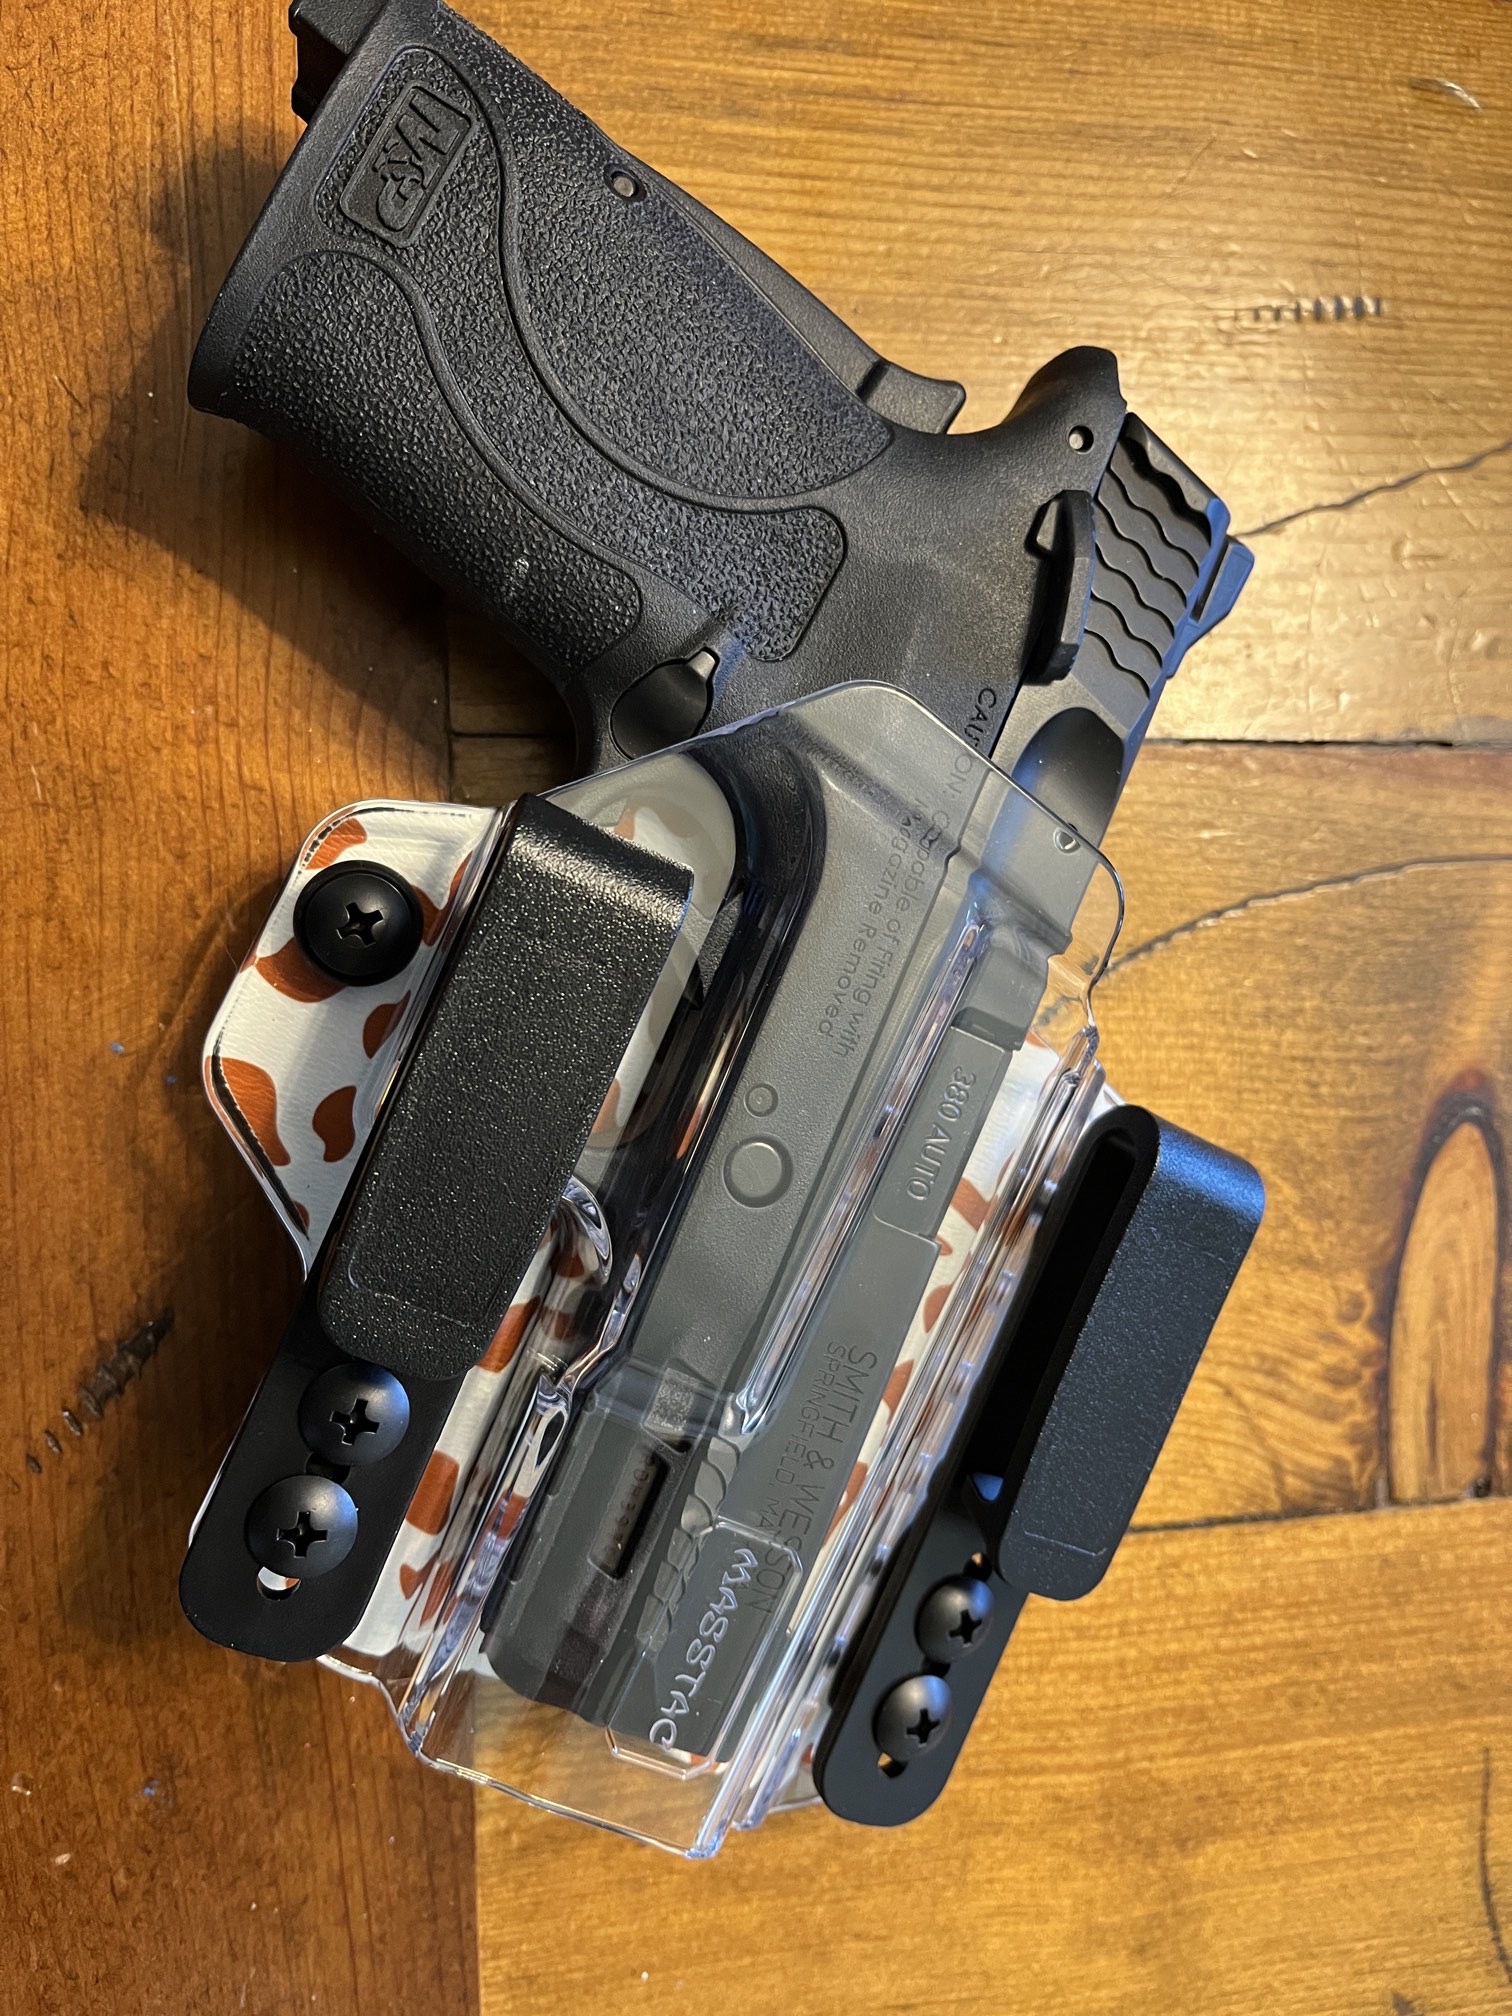 Great concealed holster for pistol